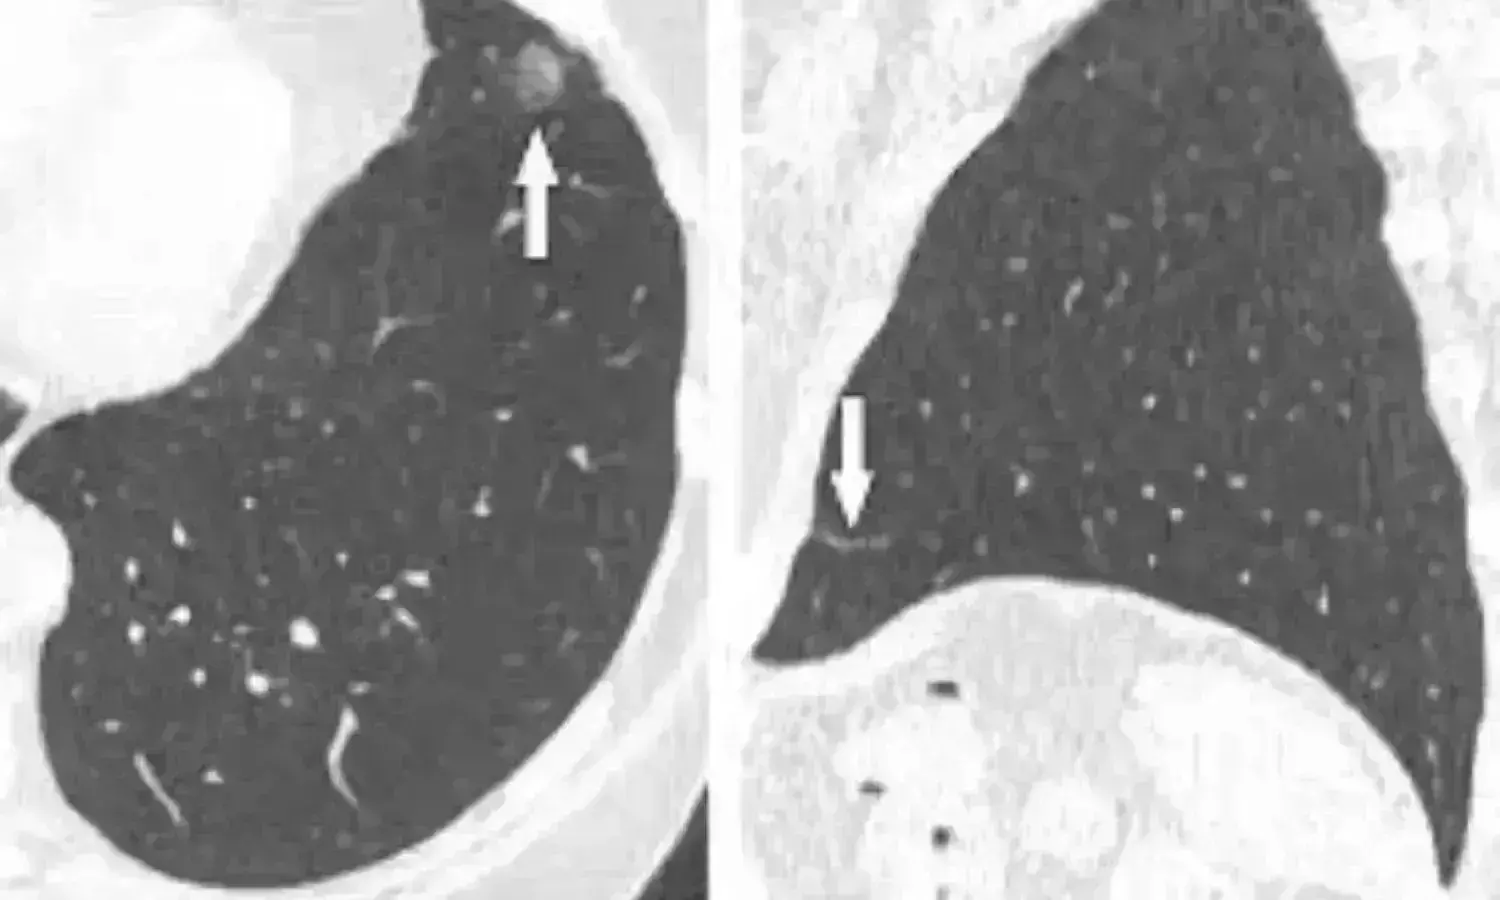 Stricter Lung-RADS may help detect cancer risk in nodules on follow-up CT: Study